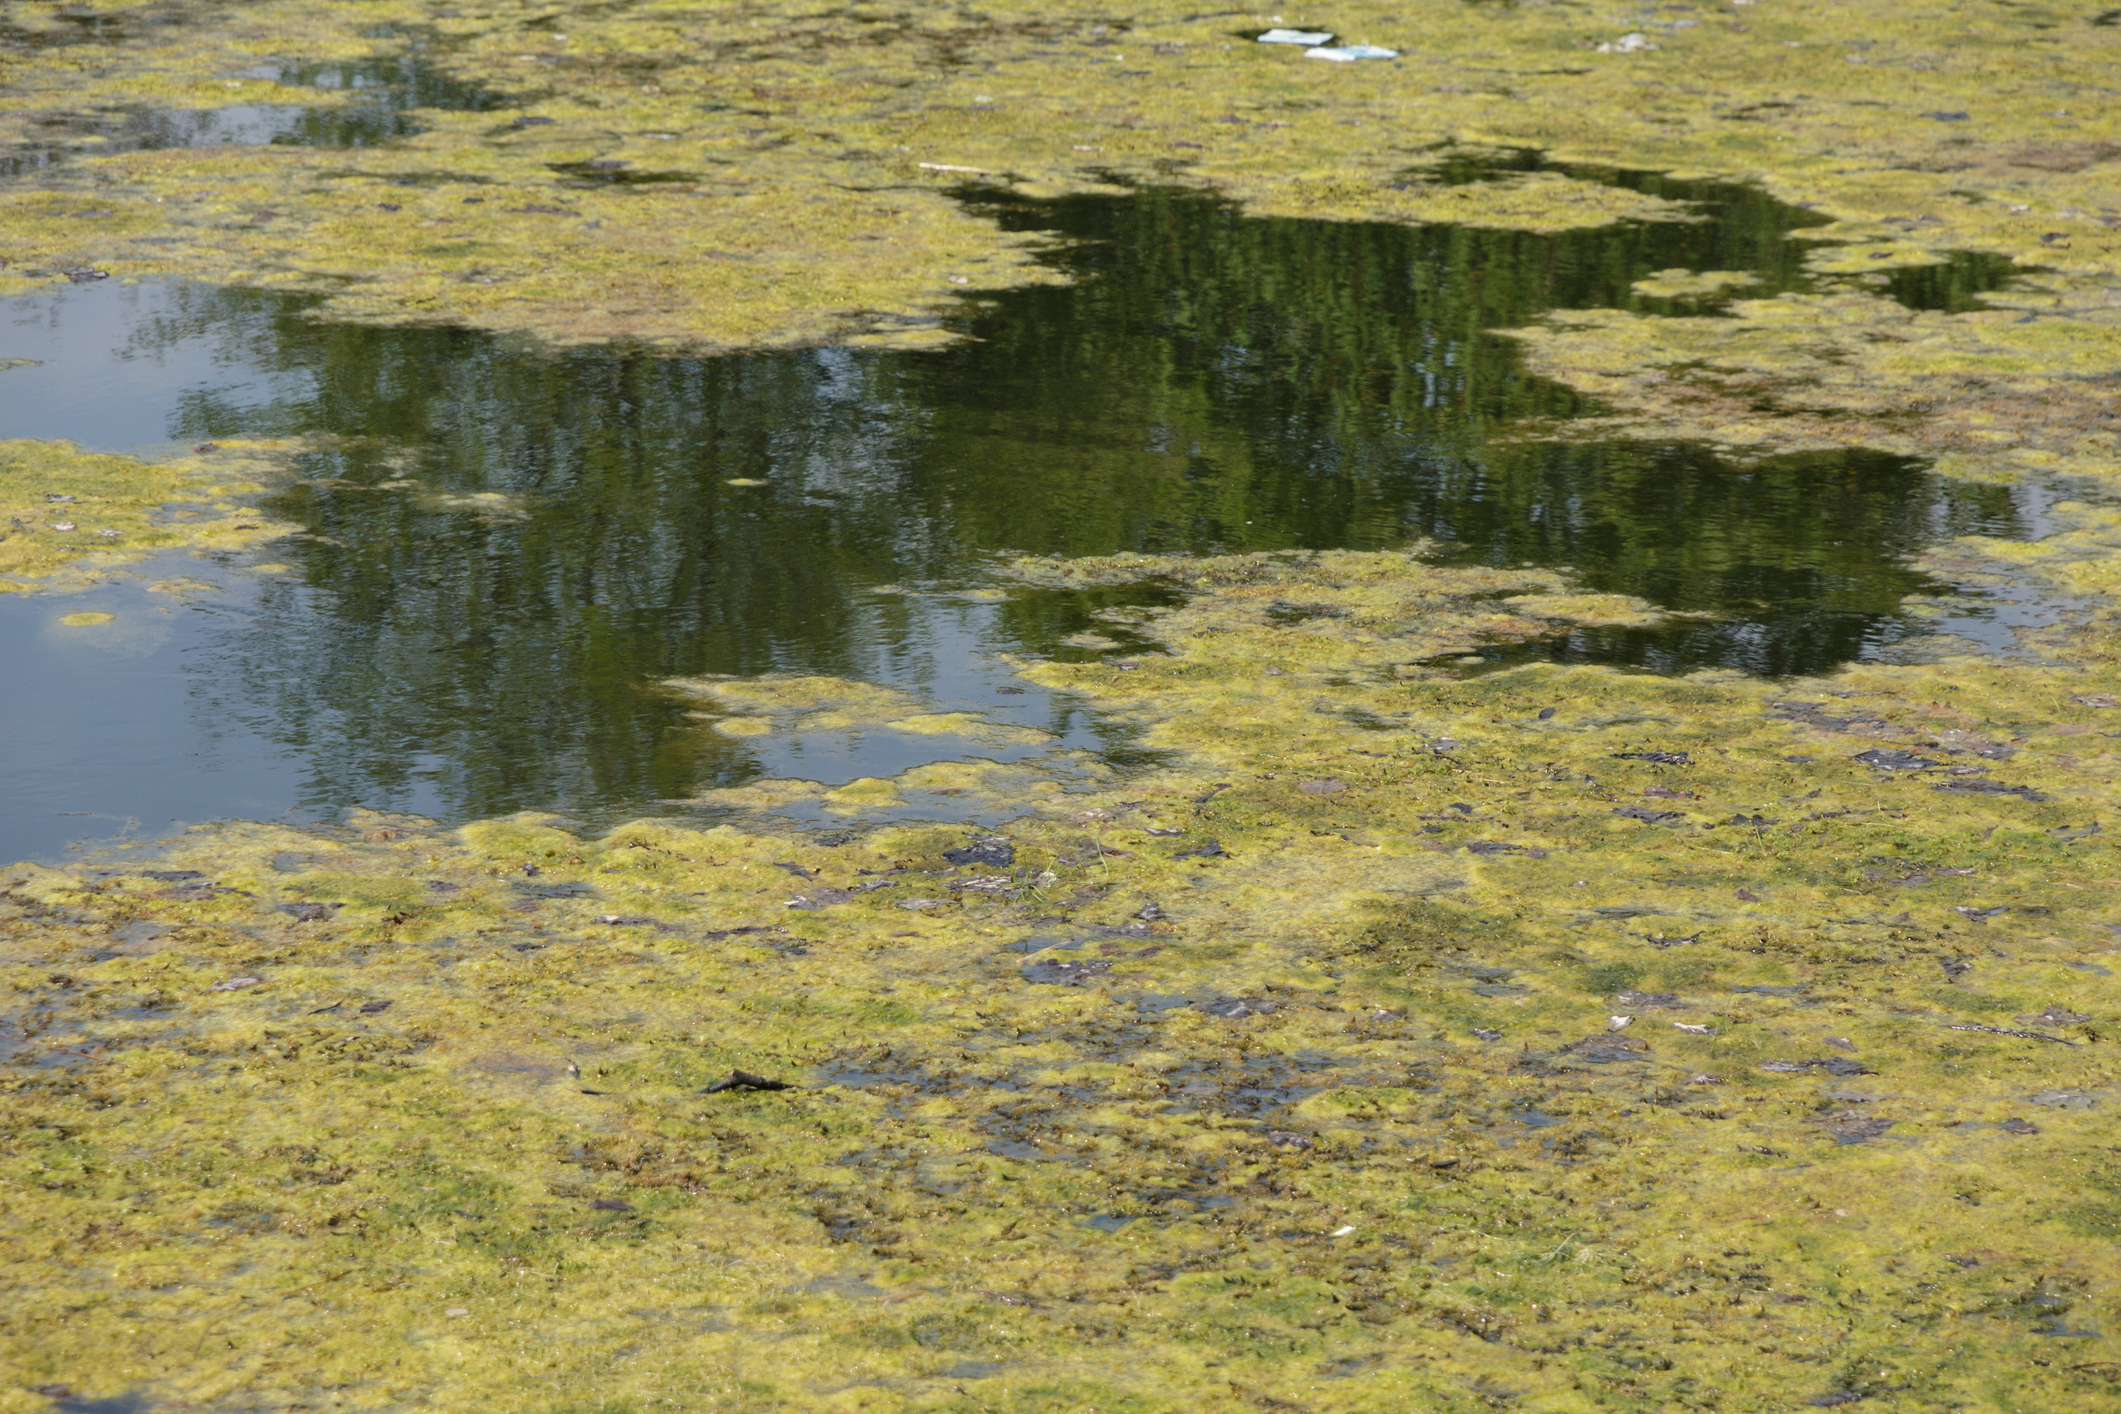 Algea-covered water.